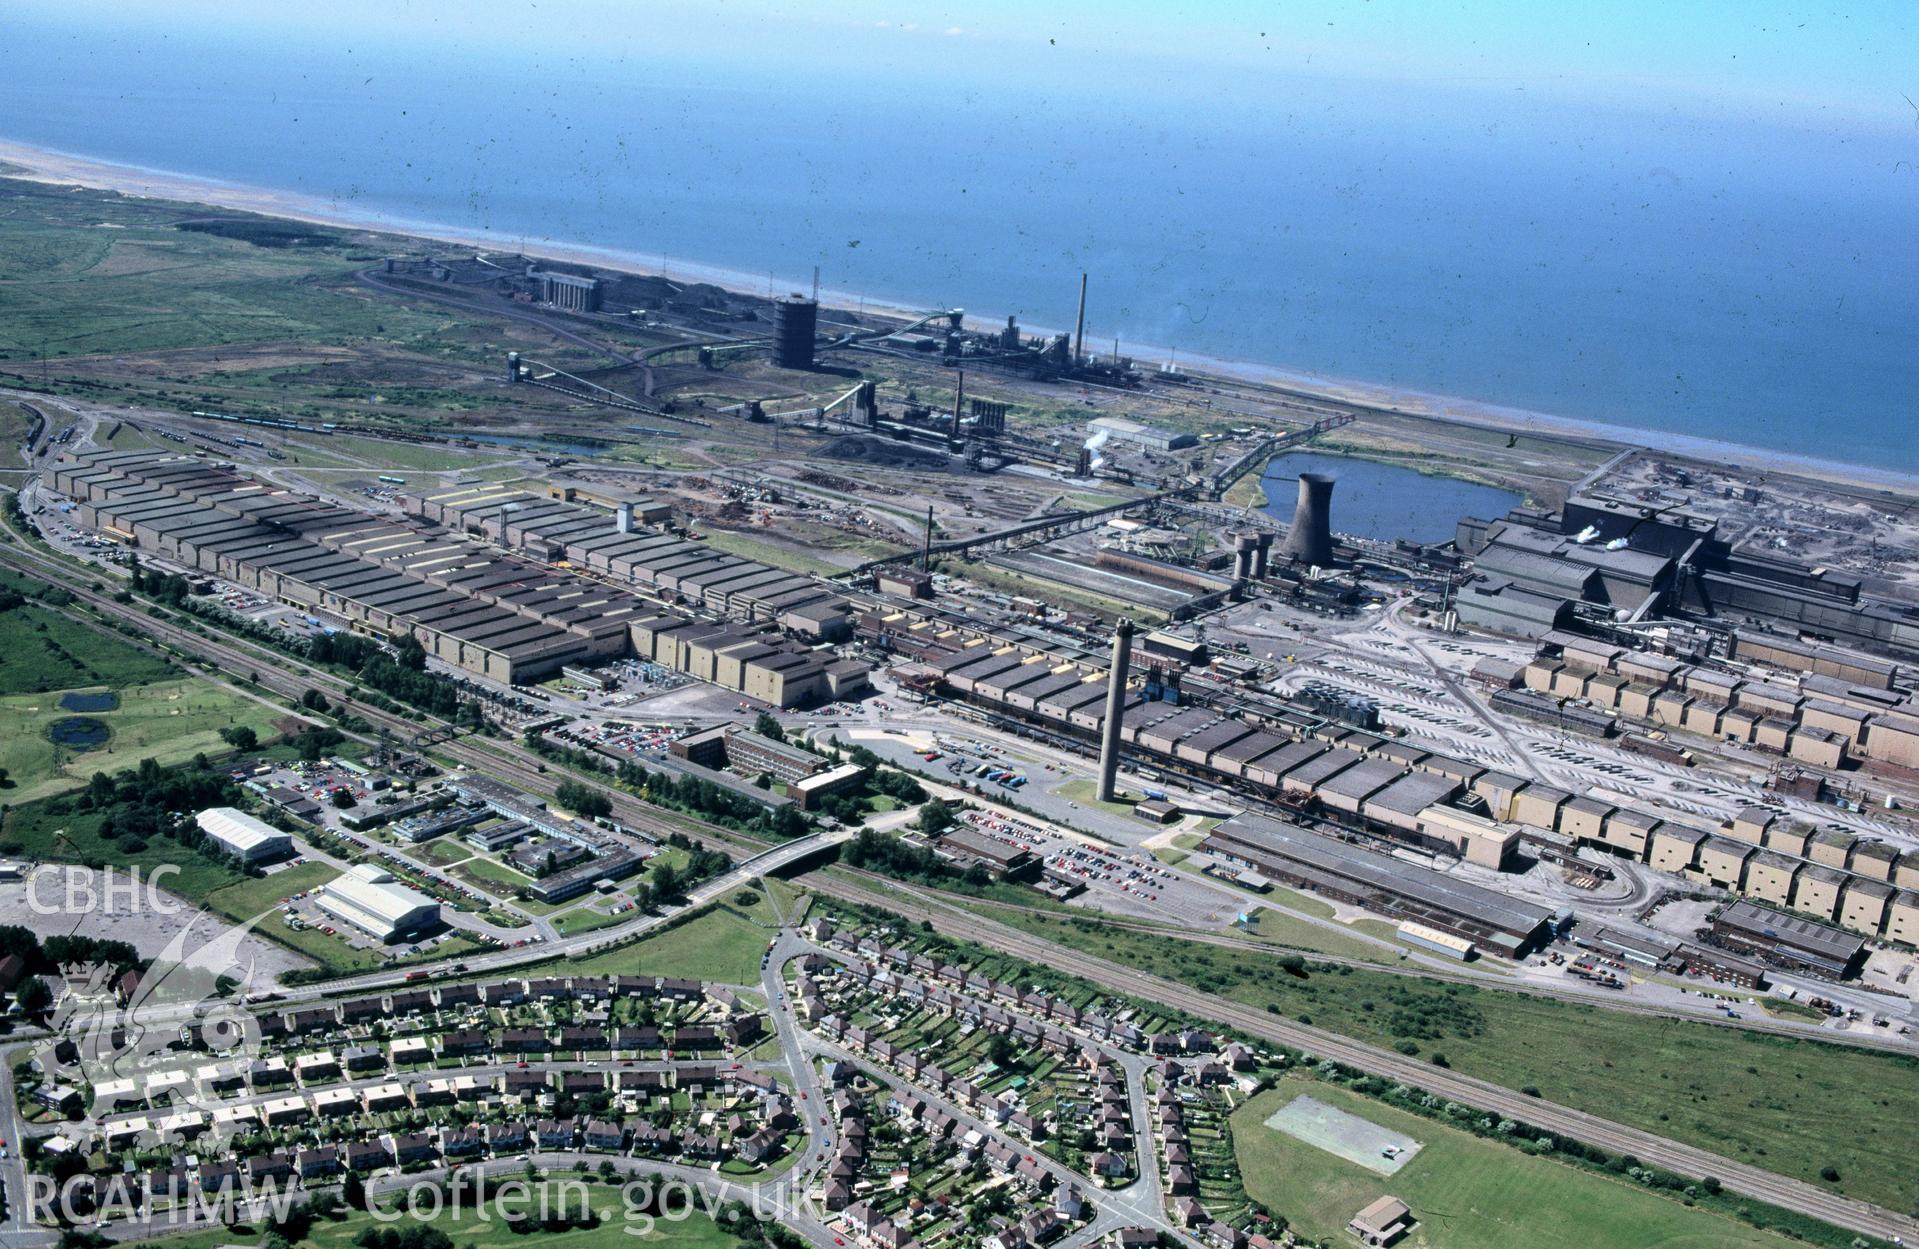 Slide of RCAHMW colour oblique aerial photograph of Port Talbot Steelworks, taken by C.R. Musson, 17/7/1996.